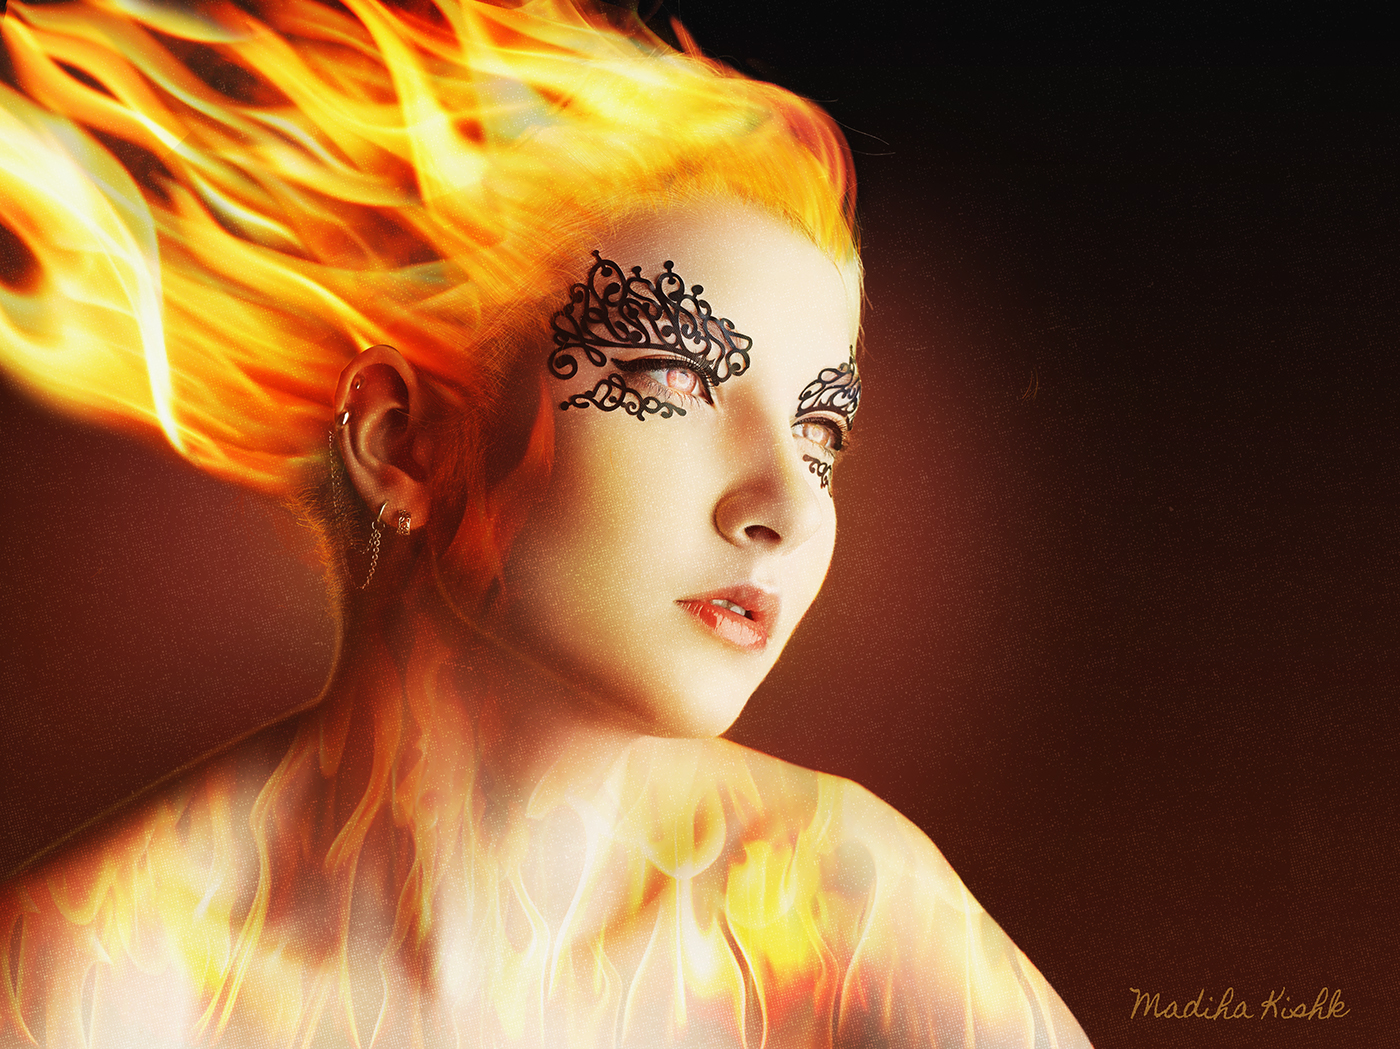 double exposure photomanipulation manipulation photoshop fire Flames girl woman fiery passion